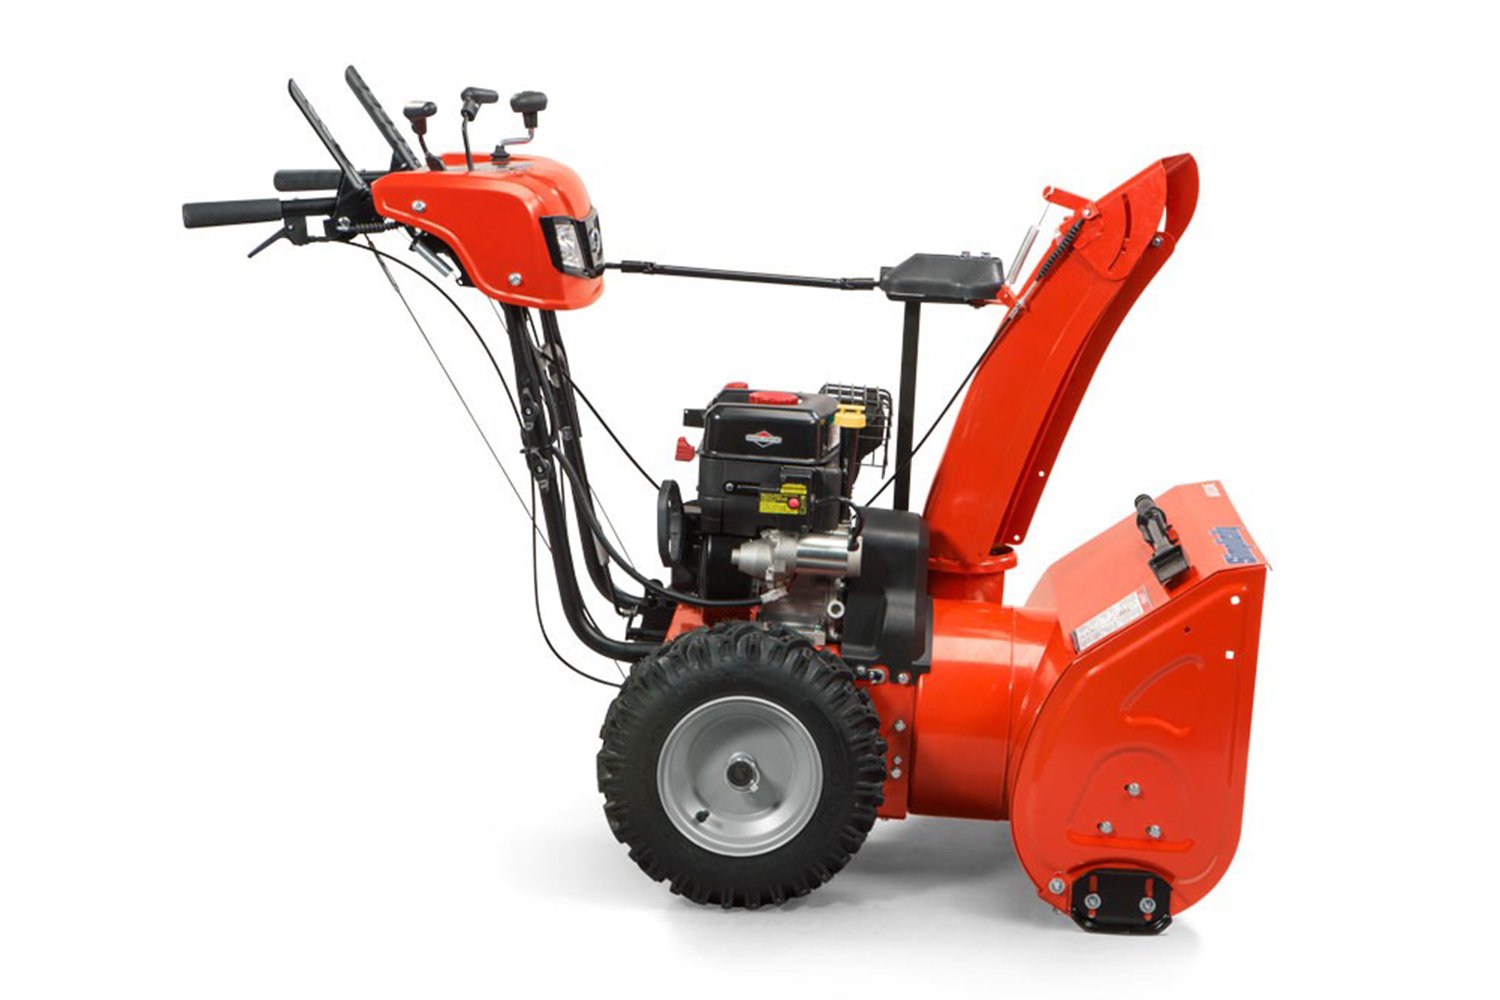 SIMPLICITY SELECT SERIES DUAL-STAGE SNOW BLOWERS 1227<br/>*Model shown in image may vary.